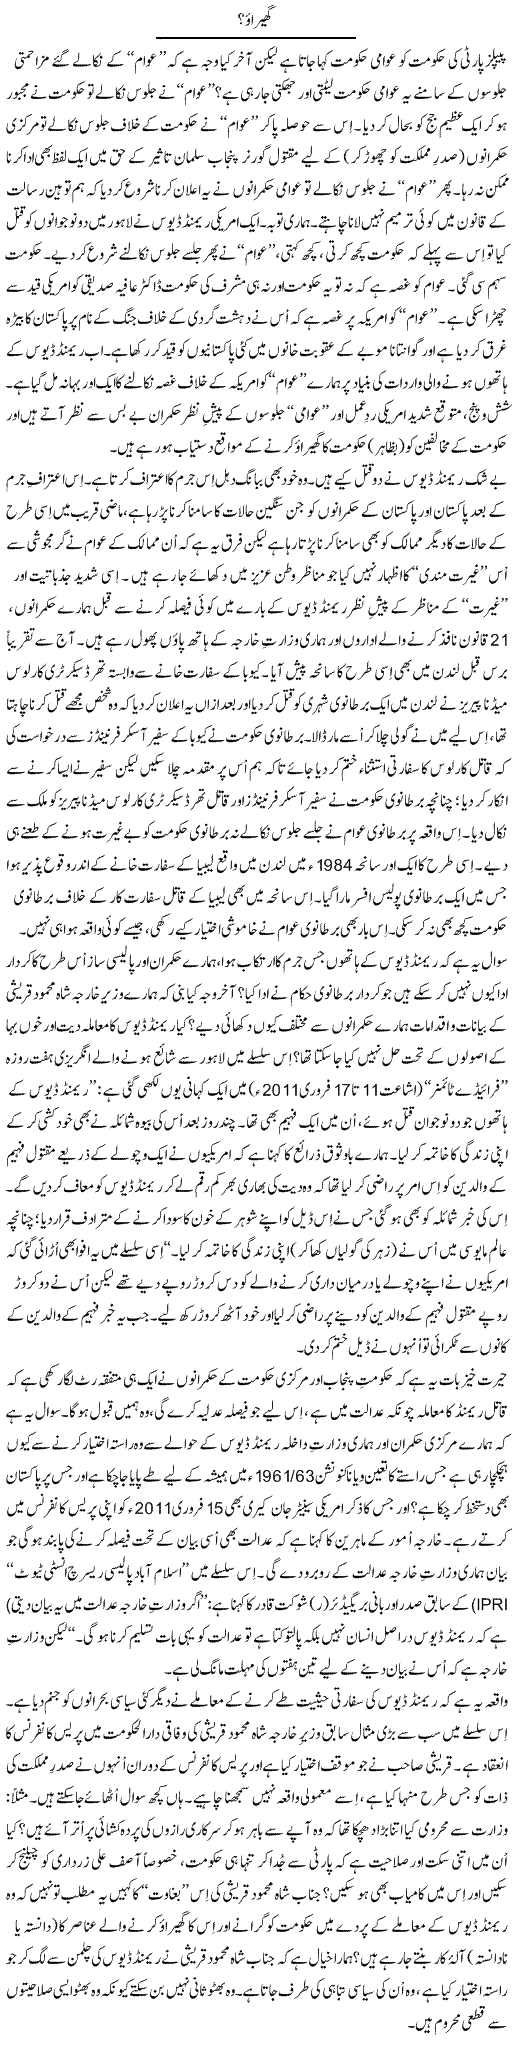 People Party and America Express Column Tanvir Qasir 18 February 2011